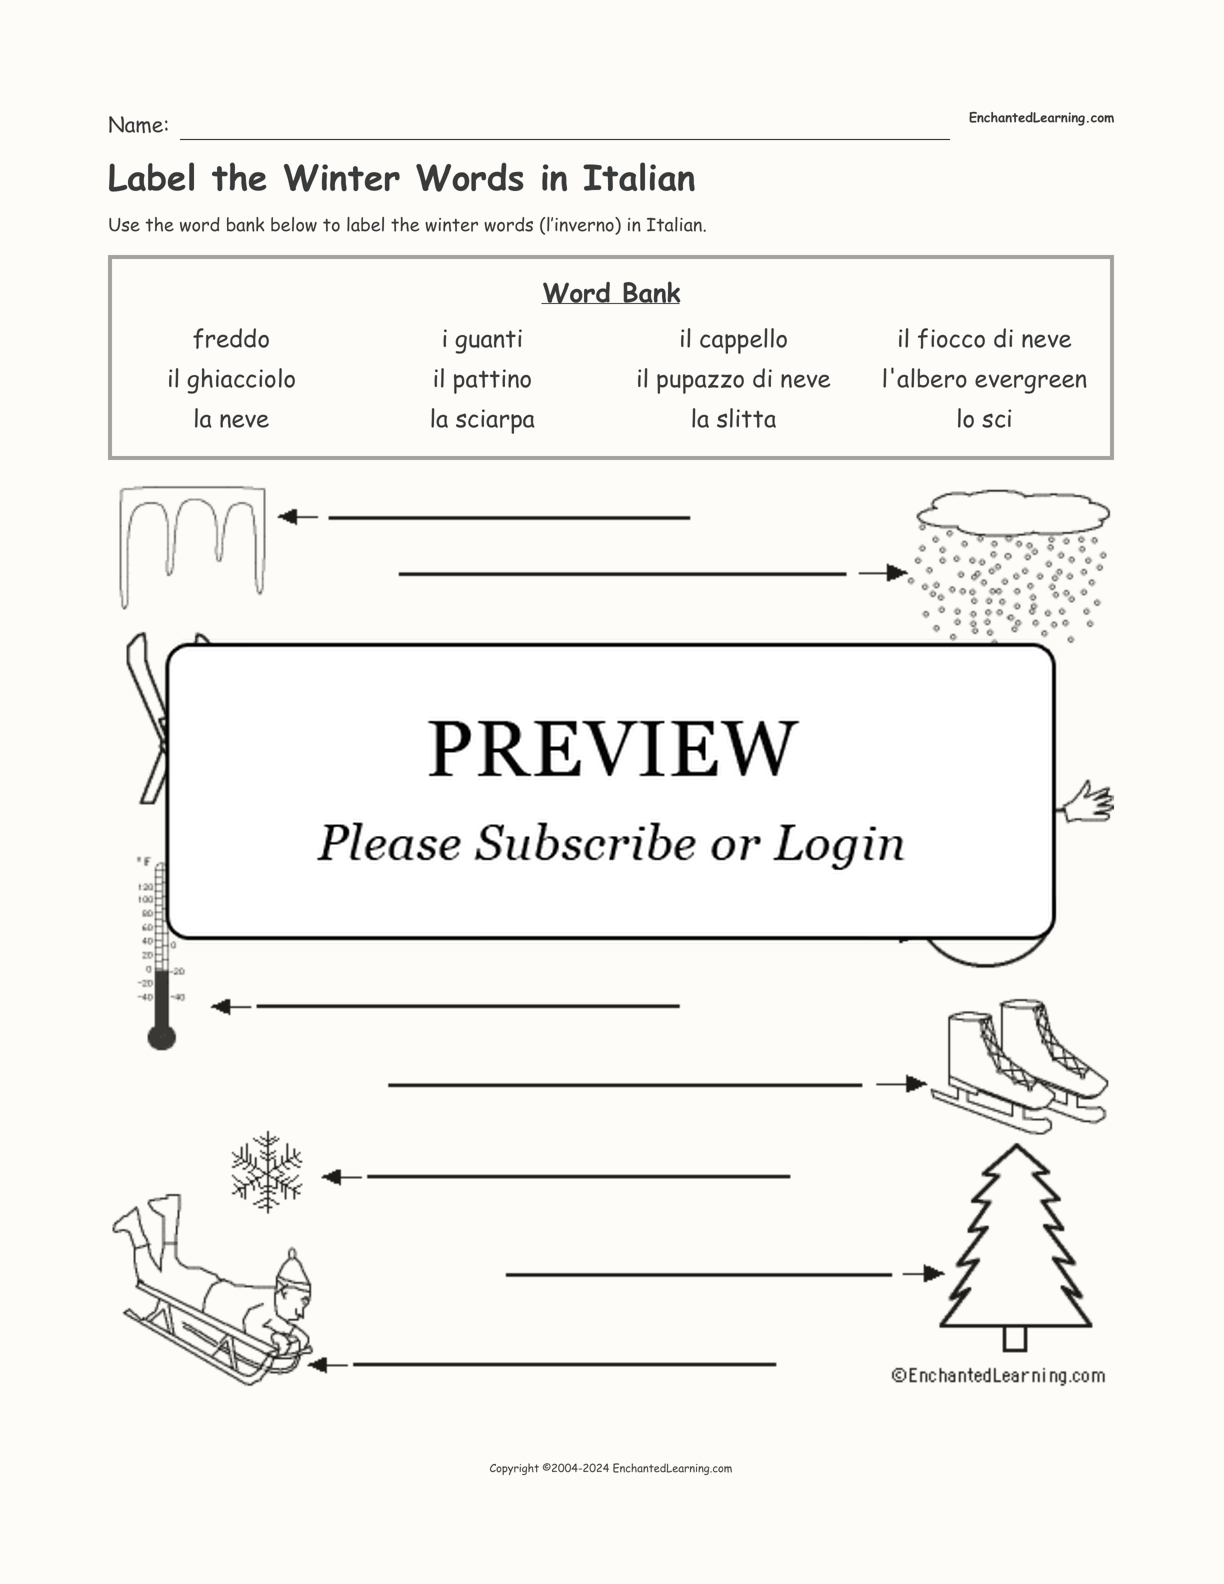 Label the Winter Words in Italian interactive worksheet page 1